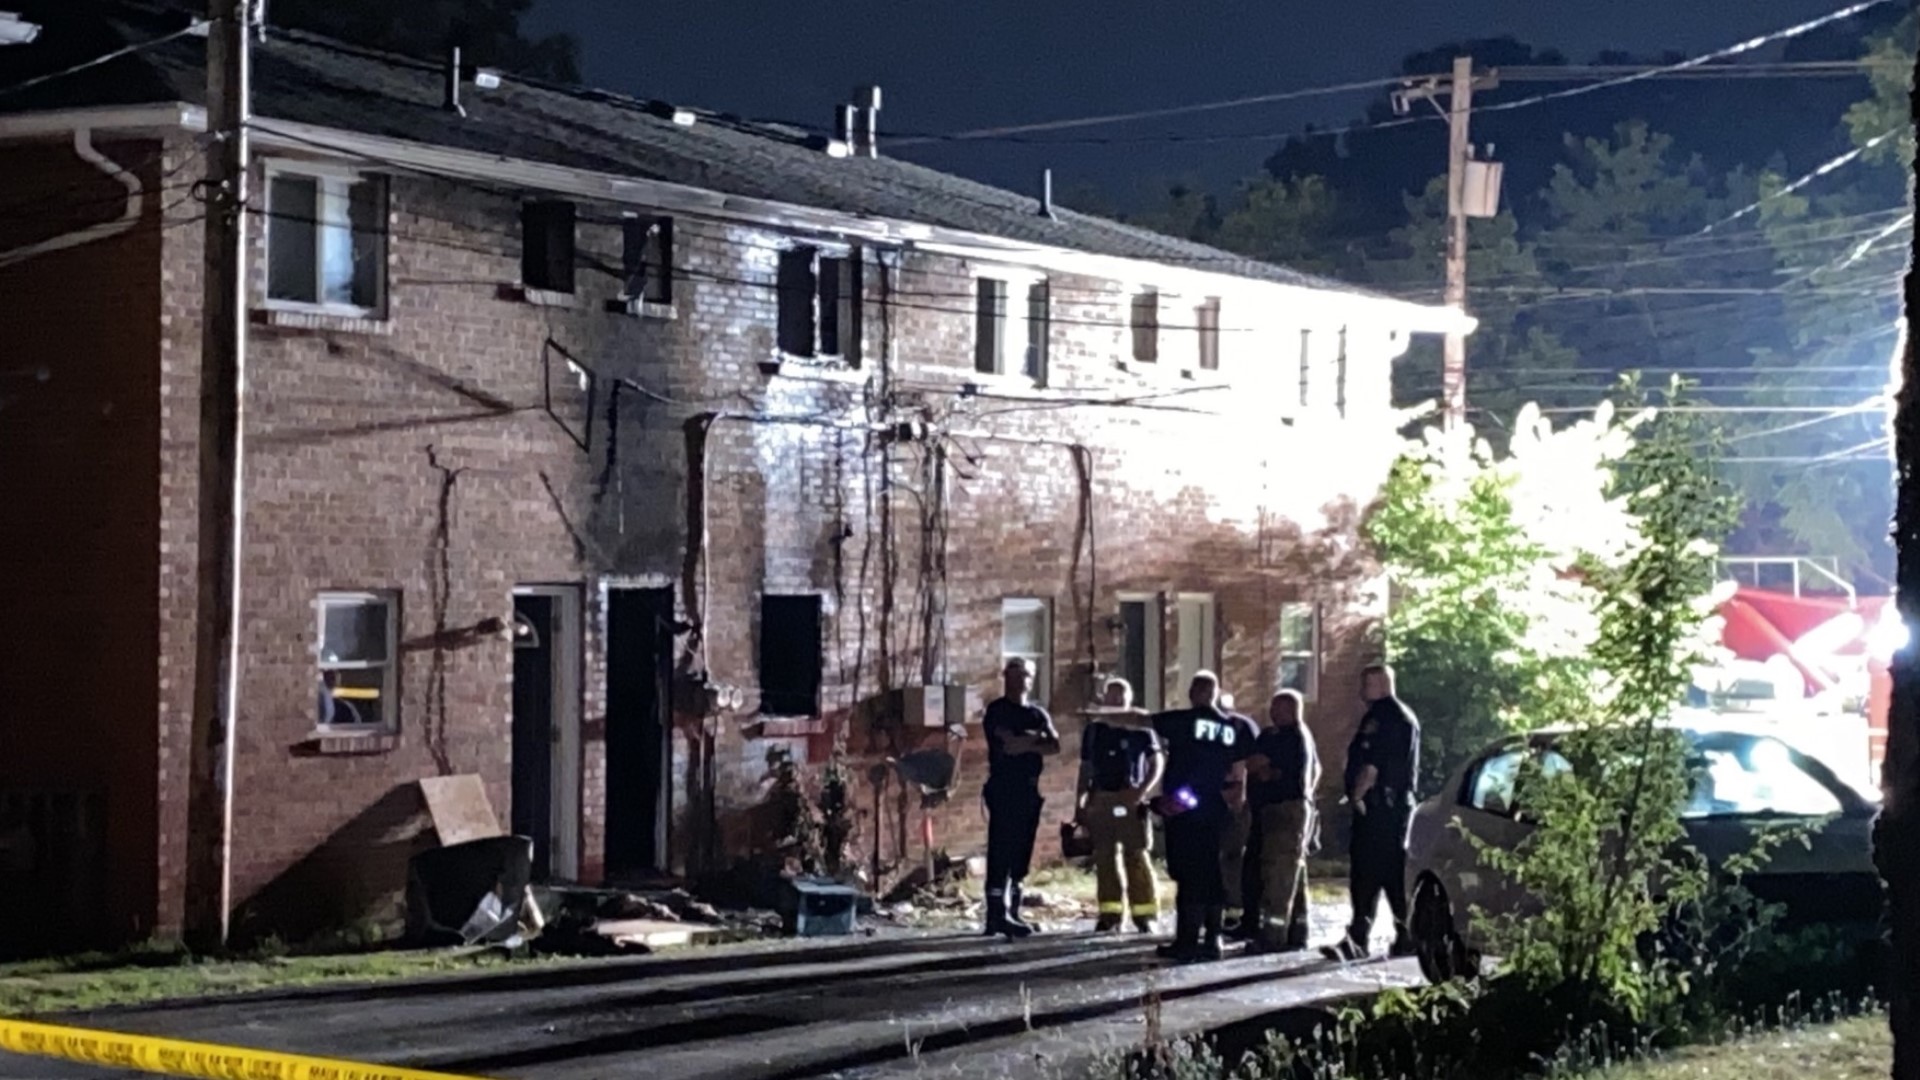 When firefighters arrived early Tuesday morning, smoke was pouring from the first and second floors, according to the Franklin Township Fire Department.